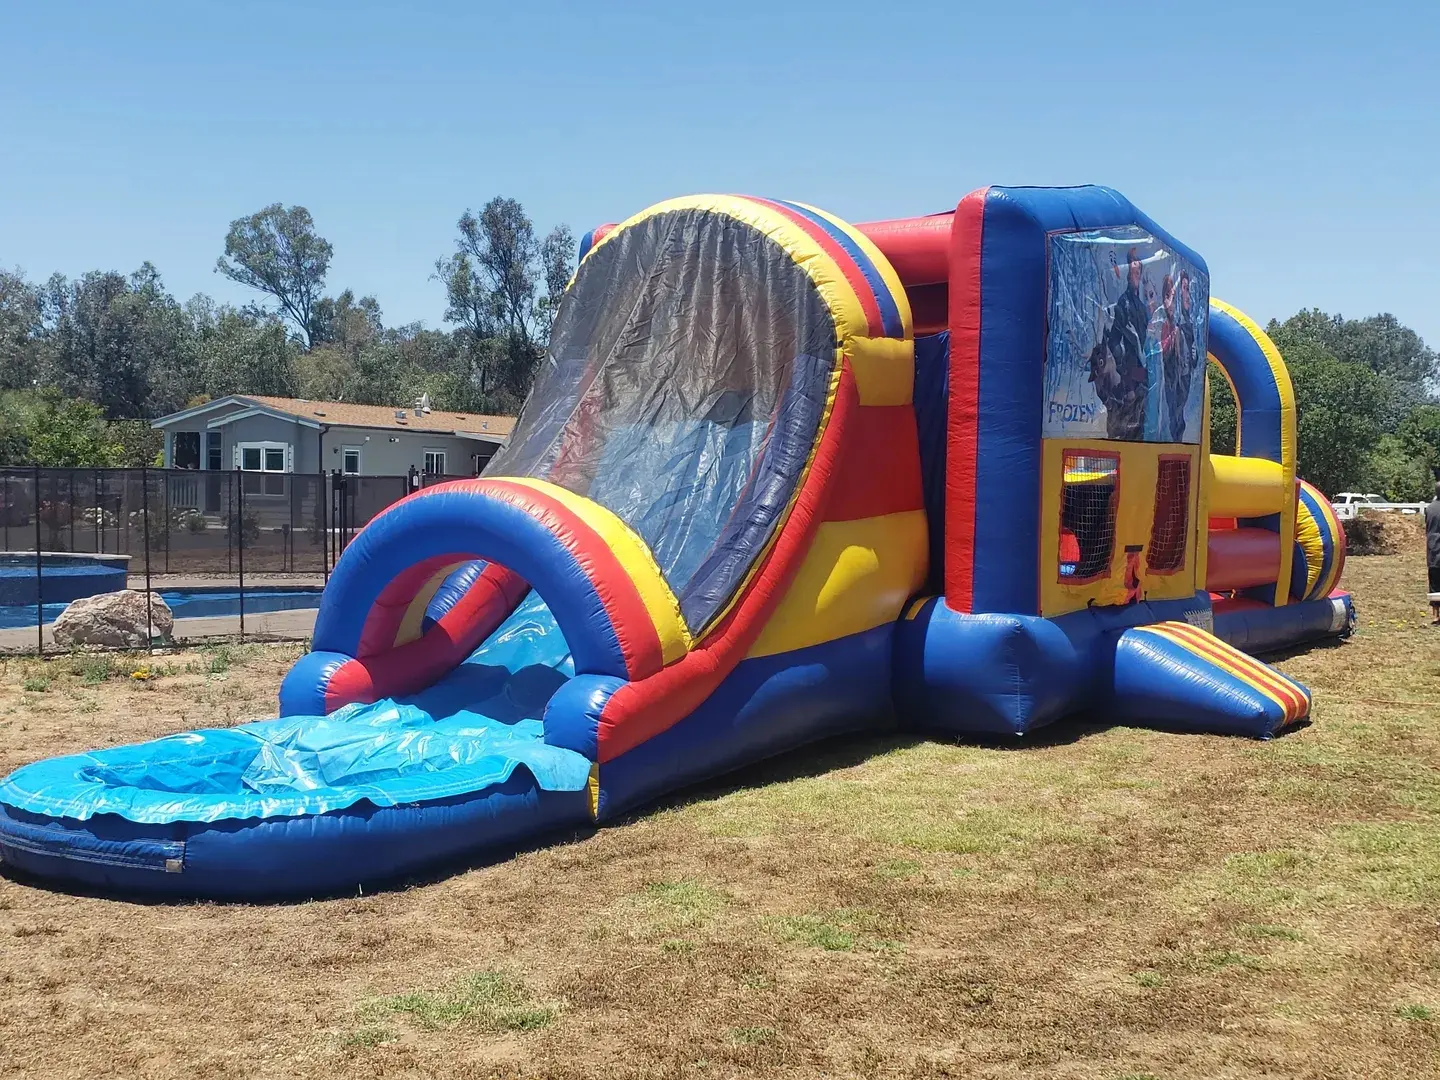 A large inflatable slide with water coming out of it.